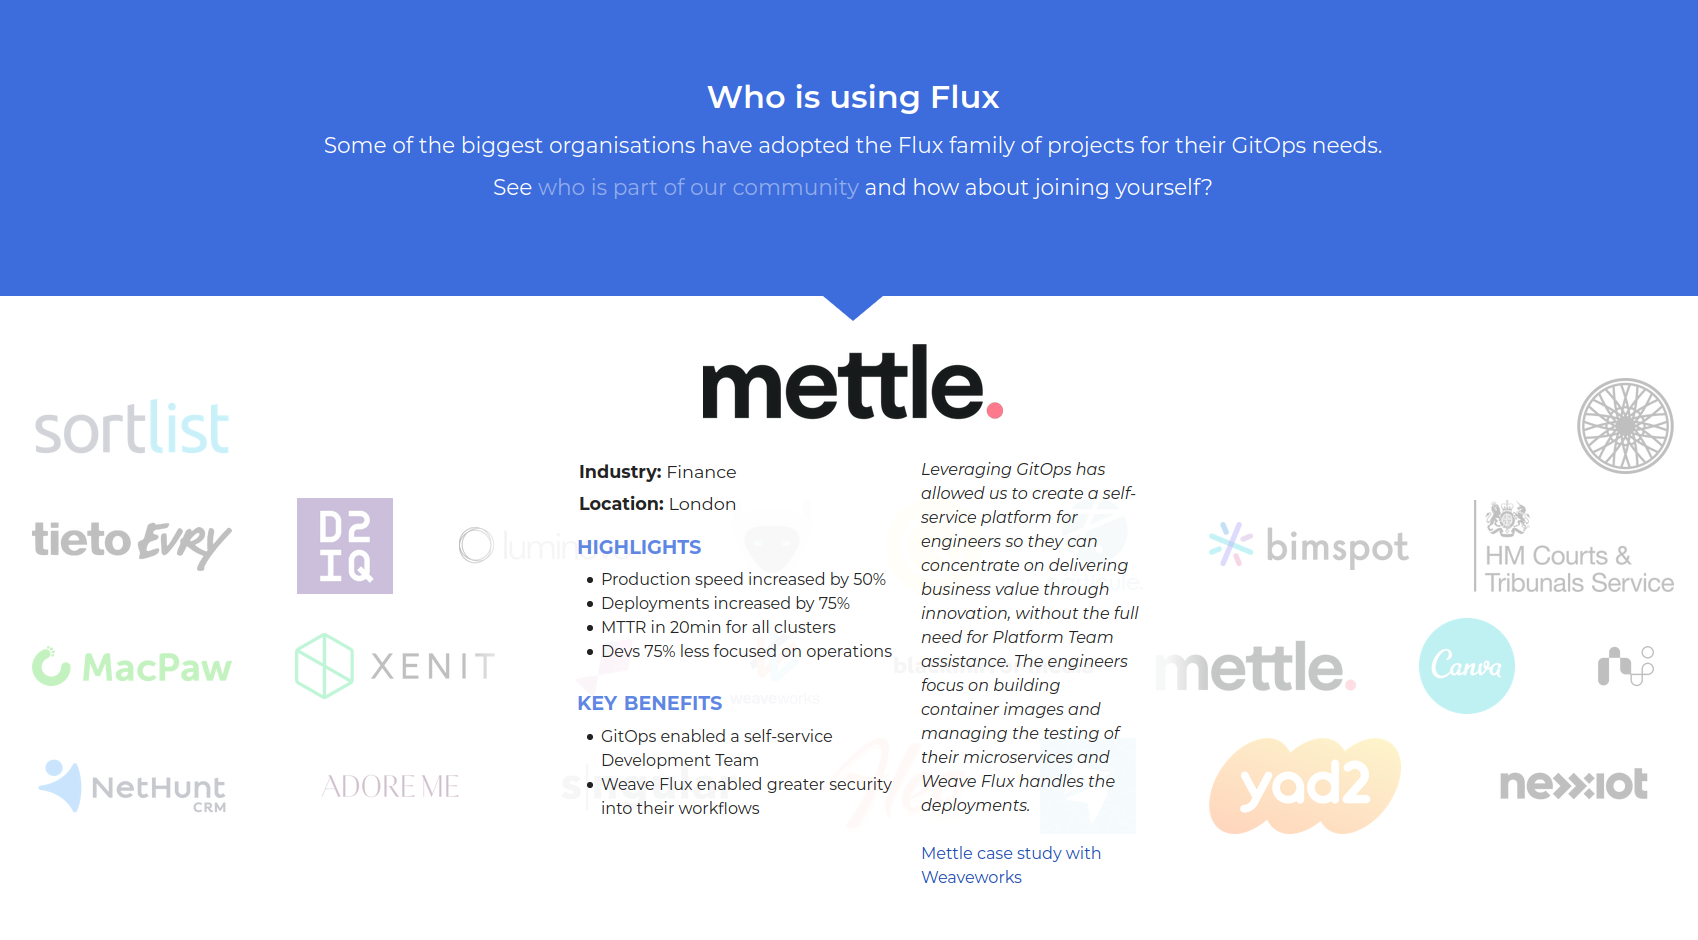 Who is using Flux